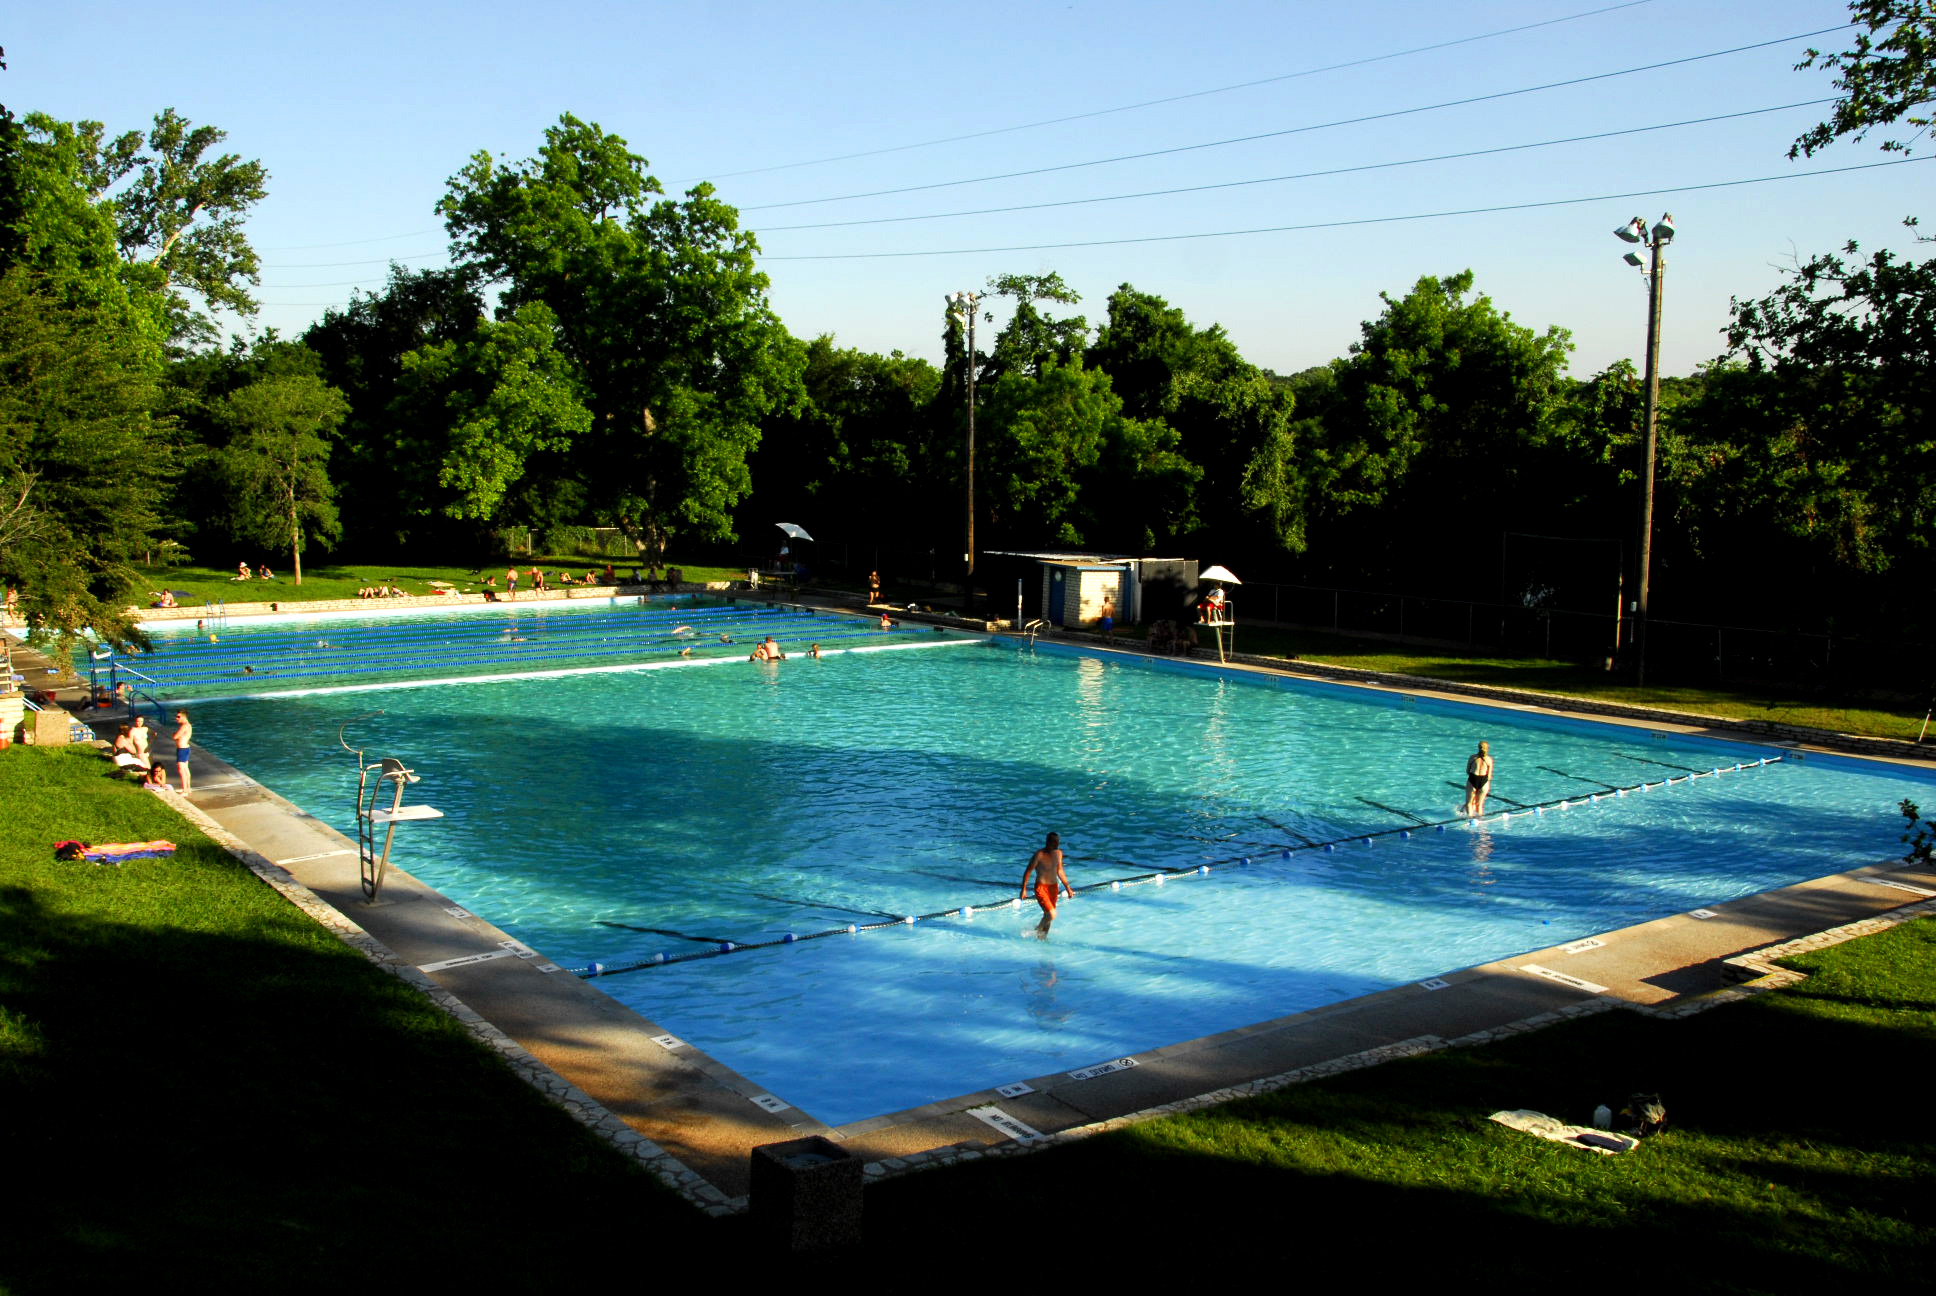 Austin's Deep Eddy Pool is open to the public every summer